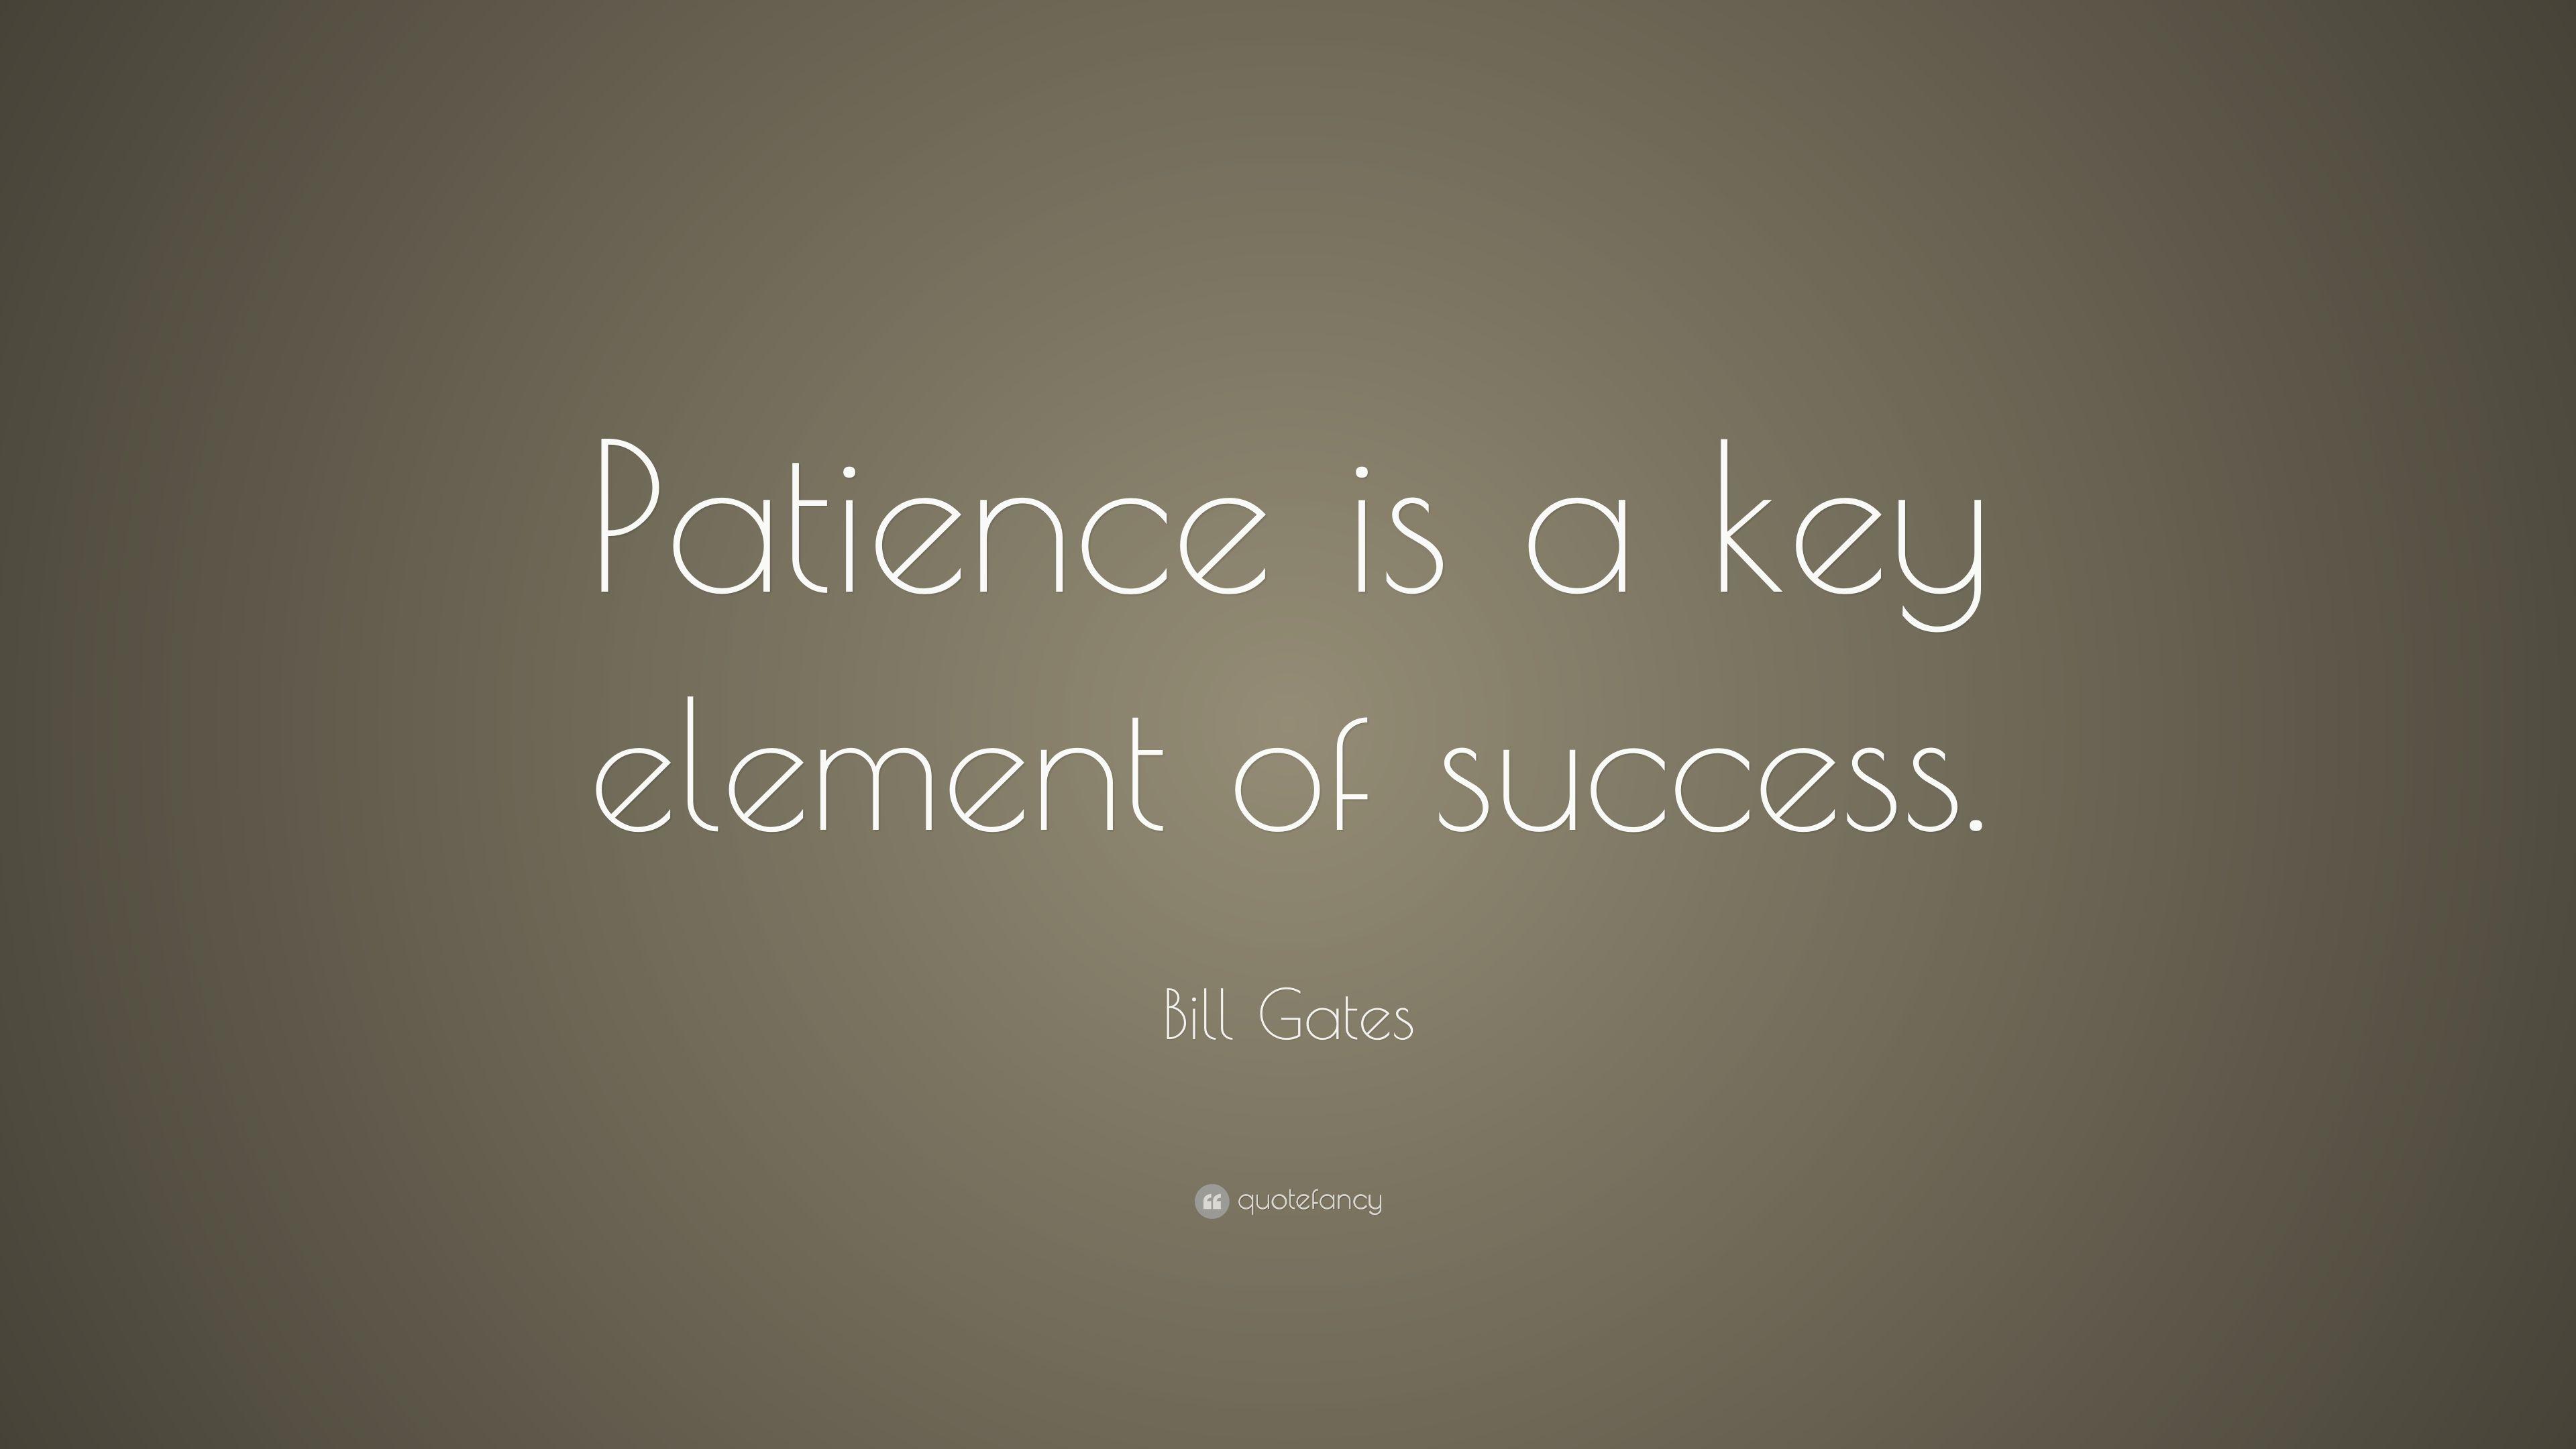 Bill Gates Quote: “Patience is a key element of success.” 40